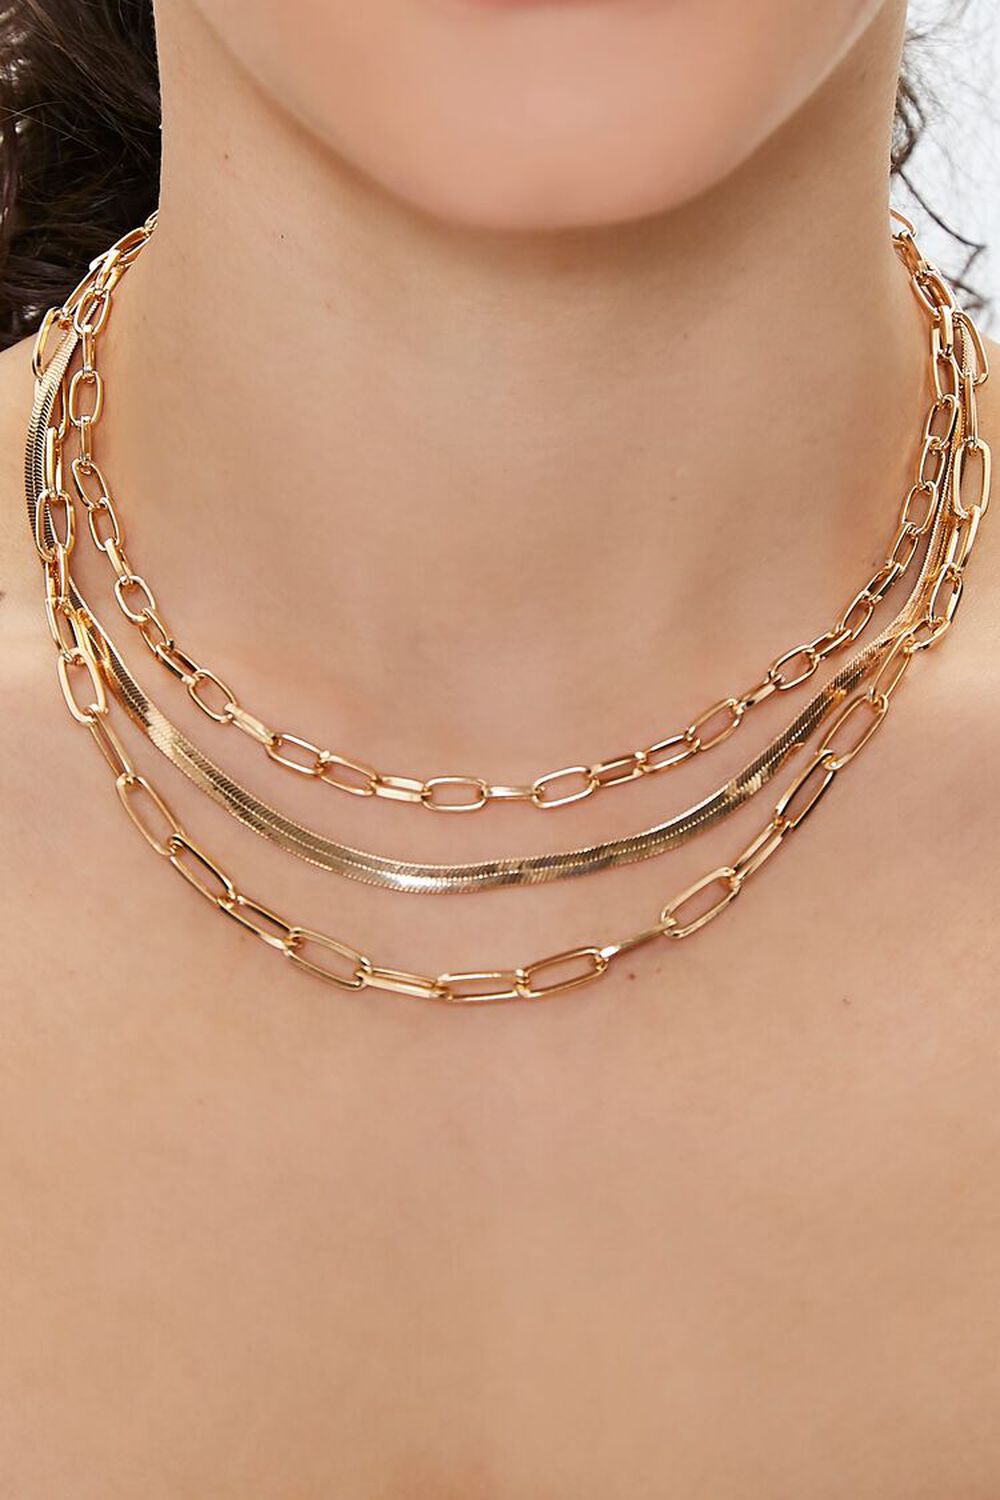 GOLD Layered Chunky Chain Necklace, image 1